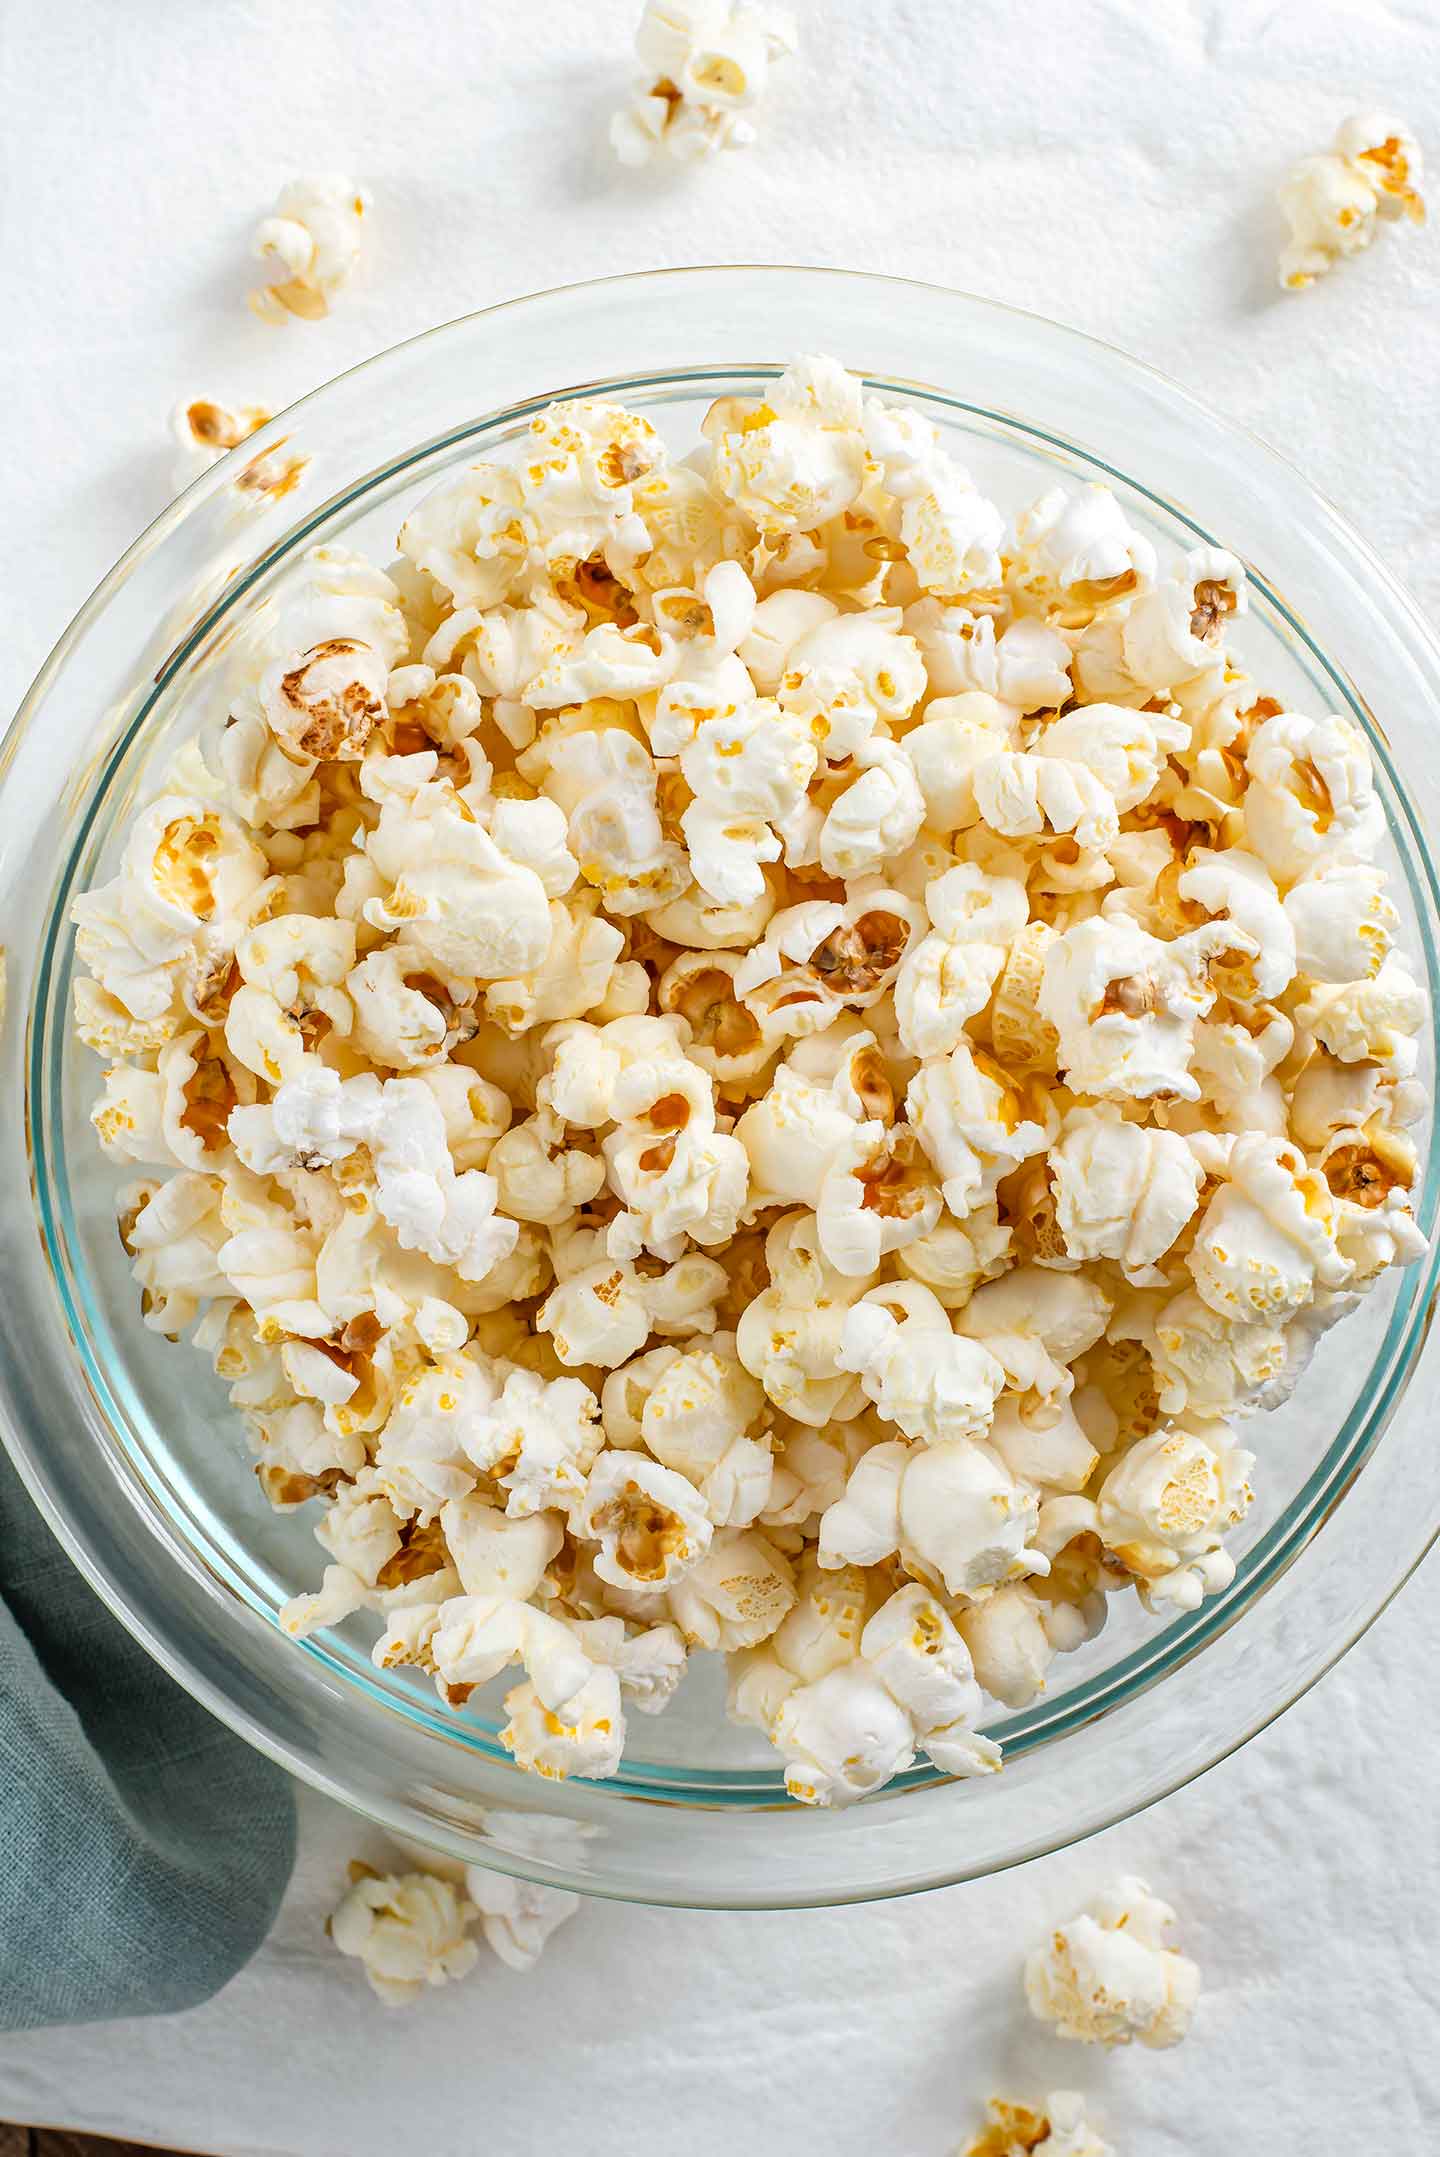 Top down view of white popcorn in a glass bowl. Some fluffy white kernels spill out of the bowl and onto the tray beneath.